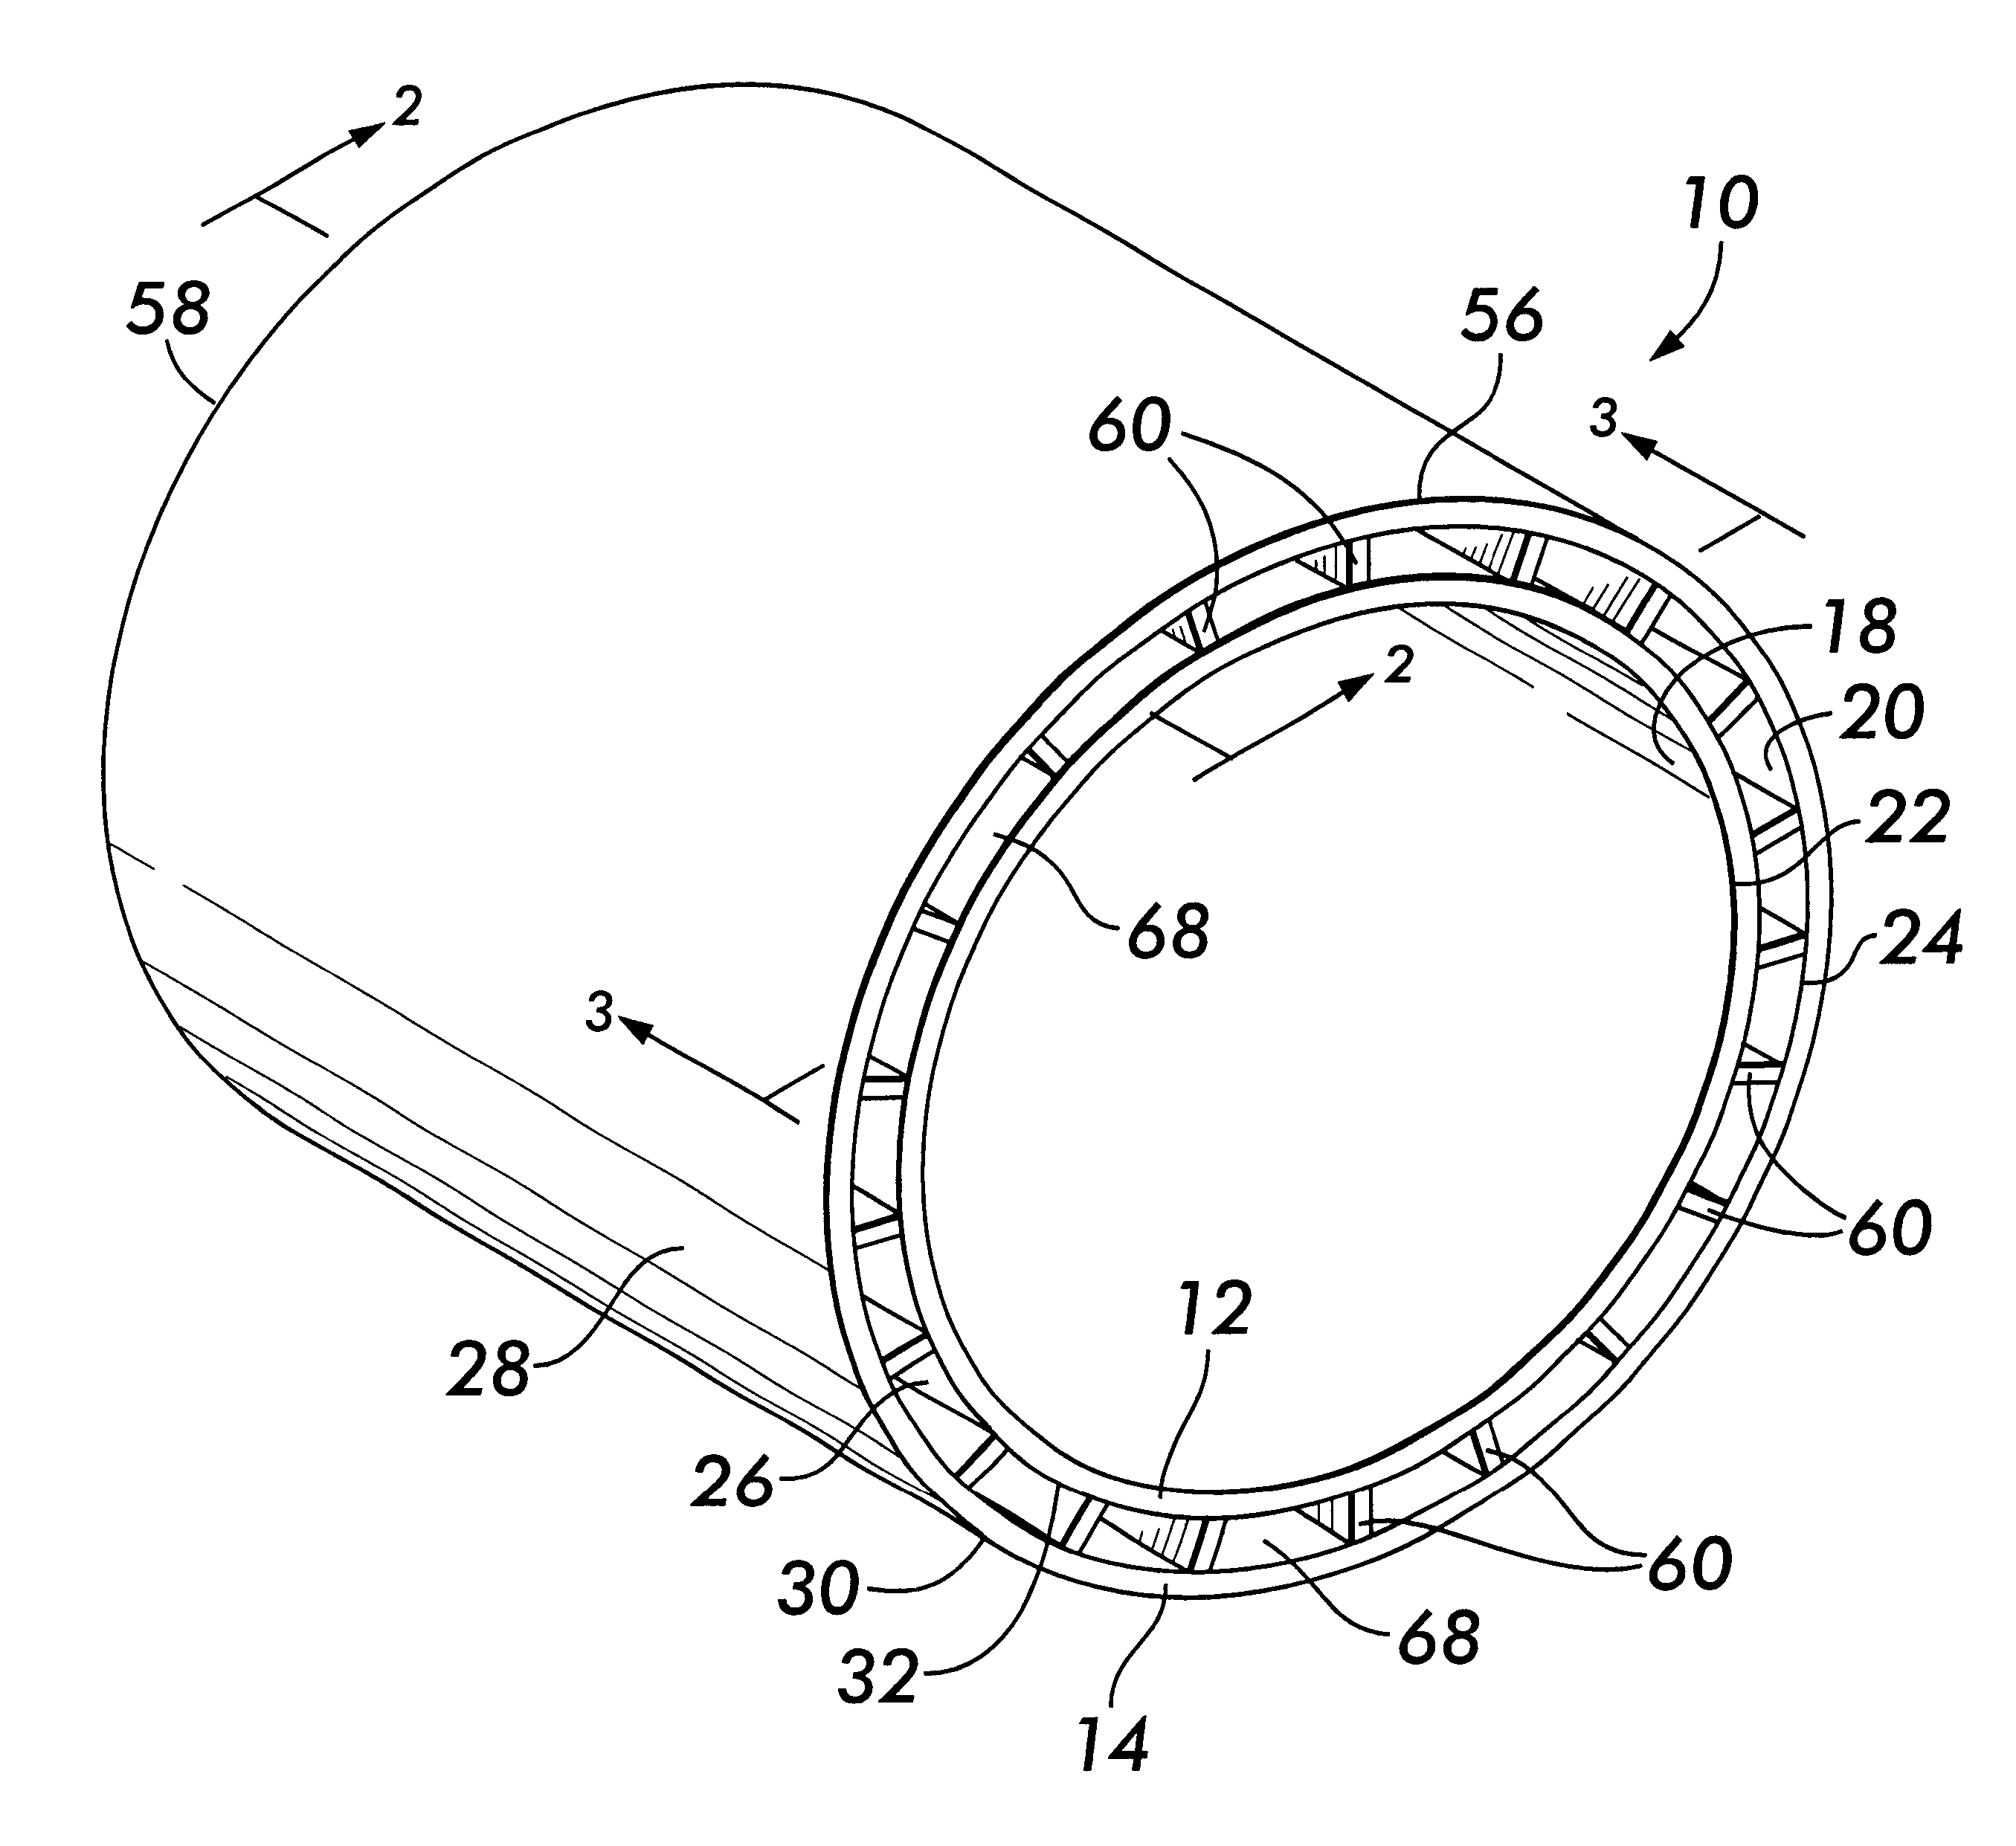 Deforming charge assembly and method of making same